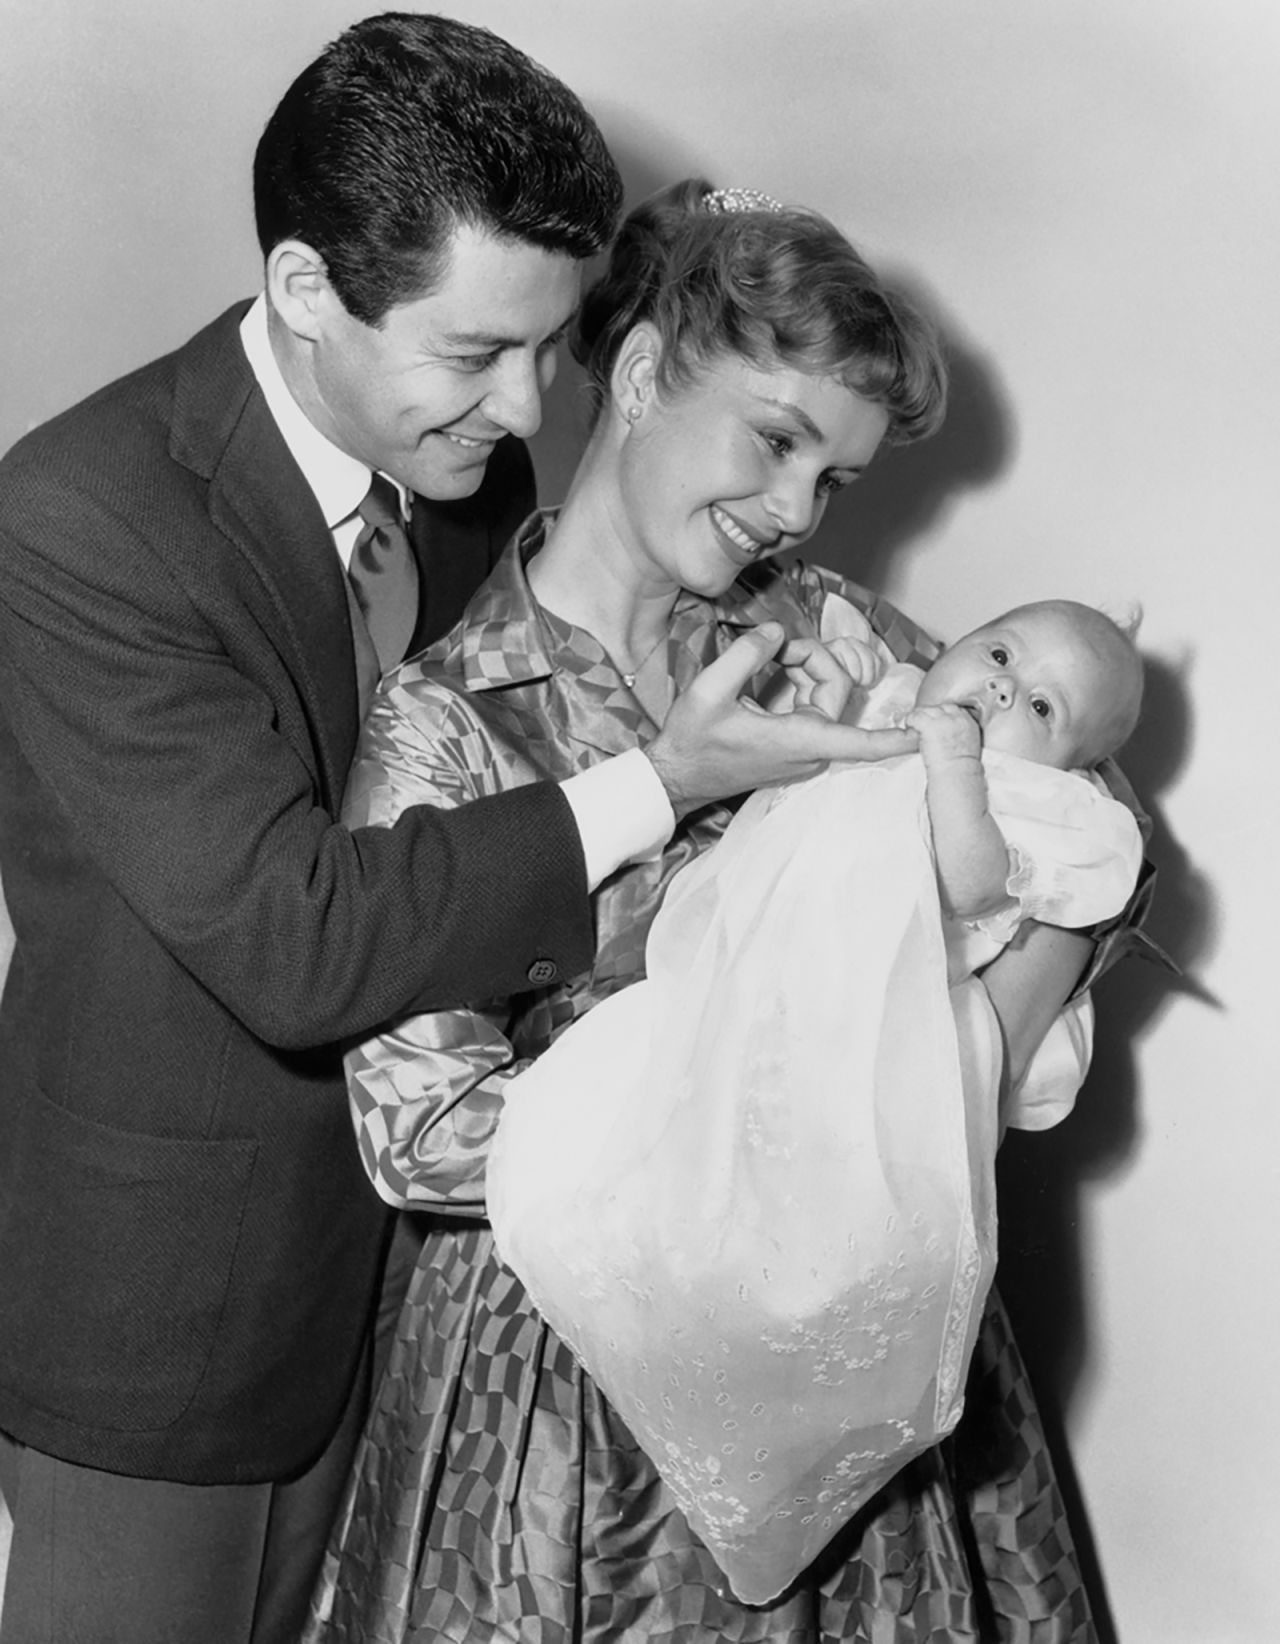 Fisher, born in 1956, was the daughter of screen legend Debbie Reynolds and singer Eddie Fisher.